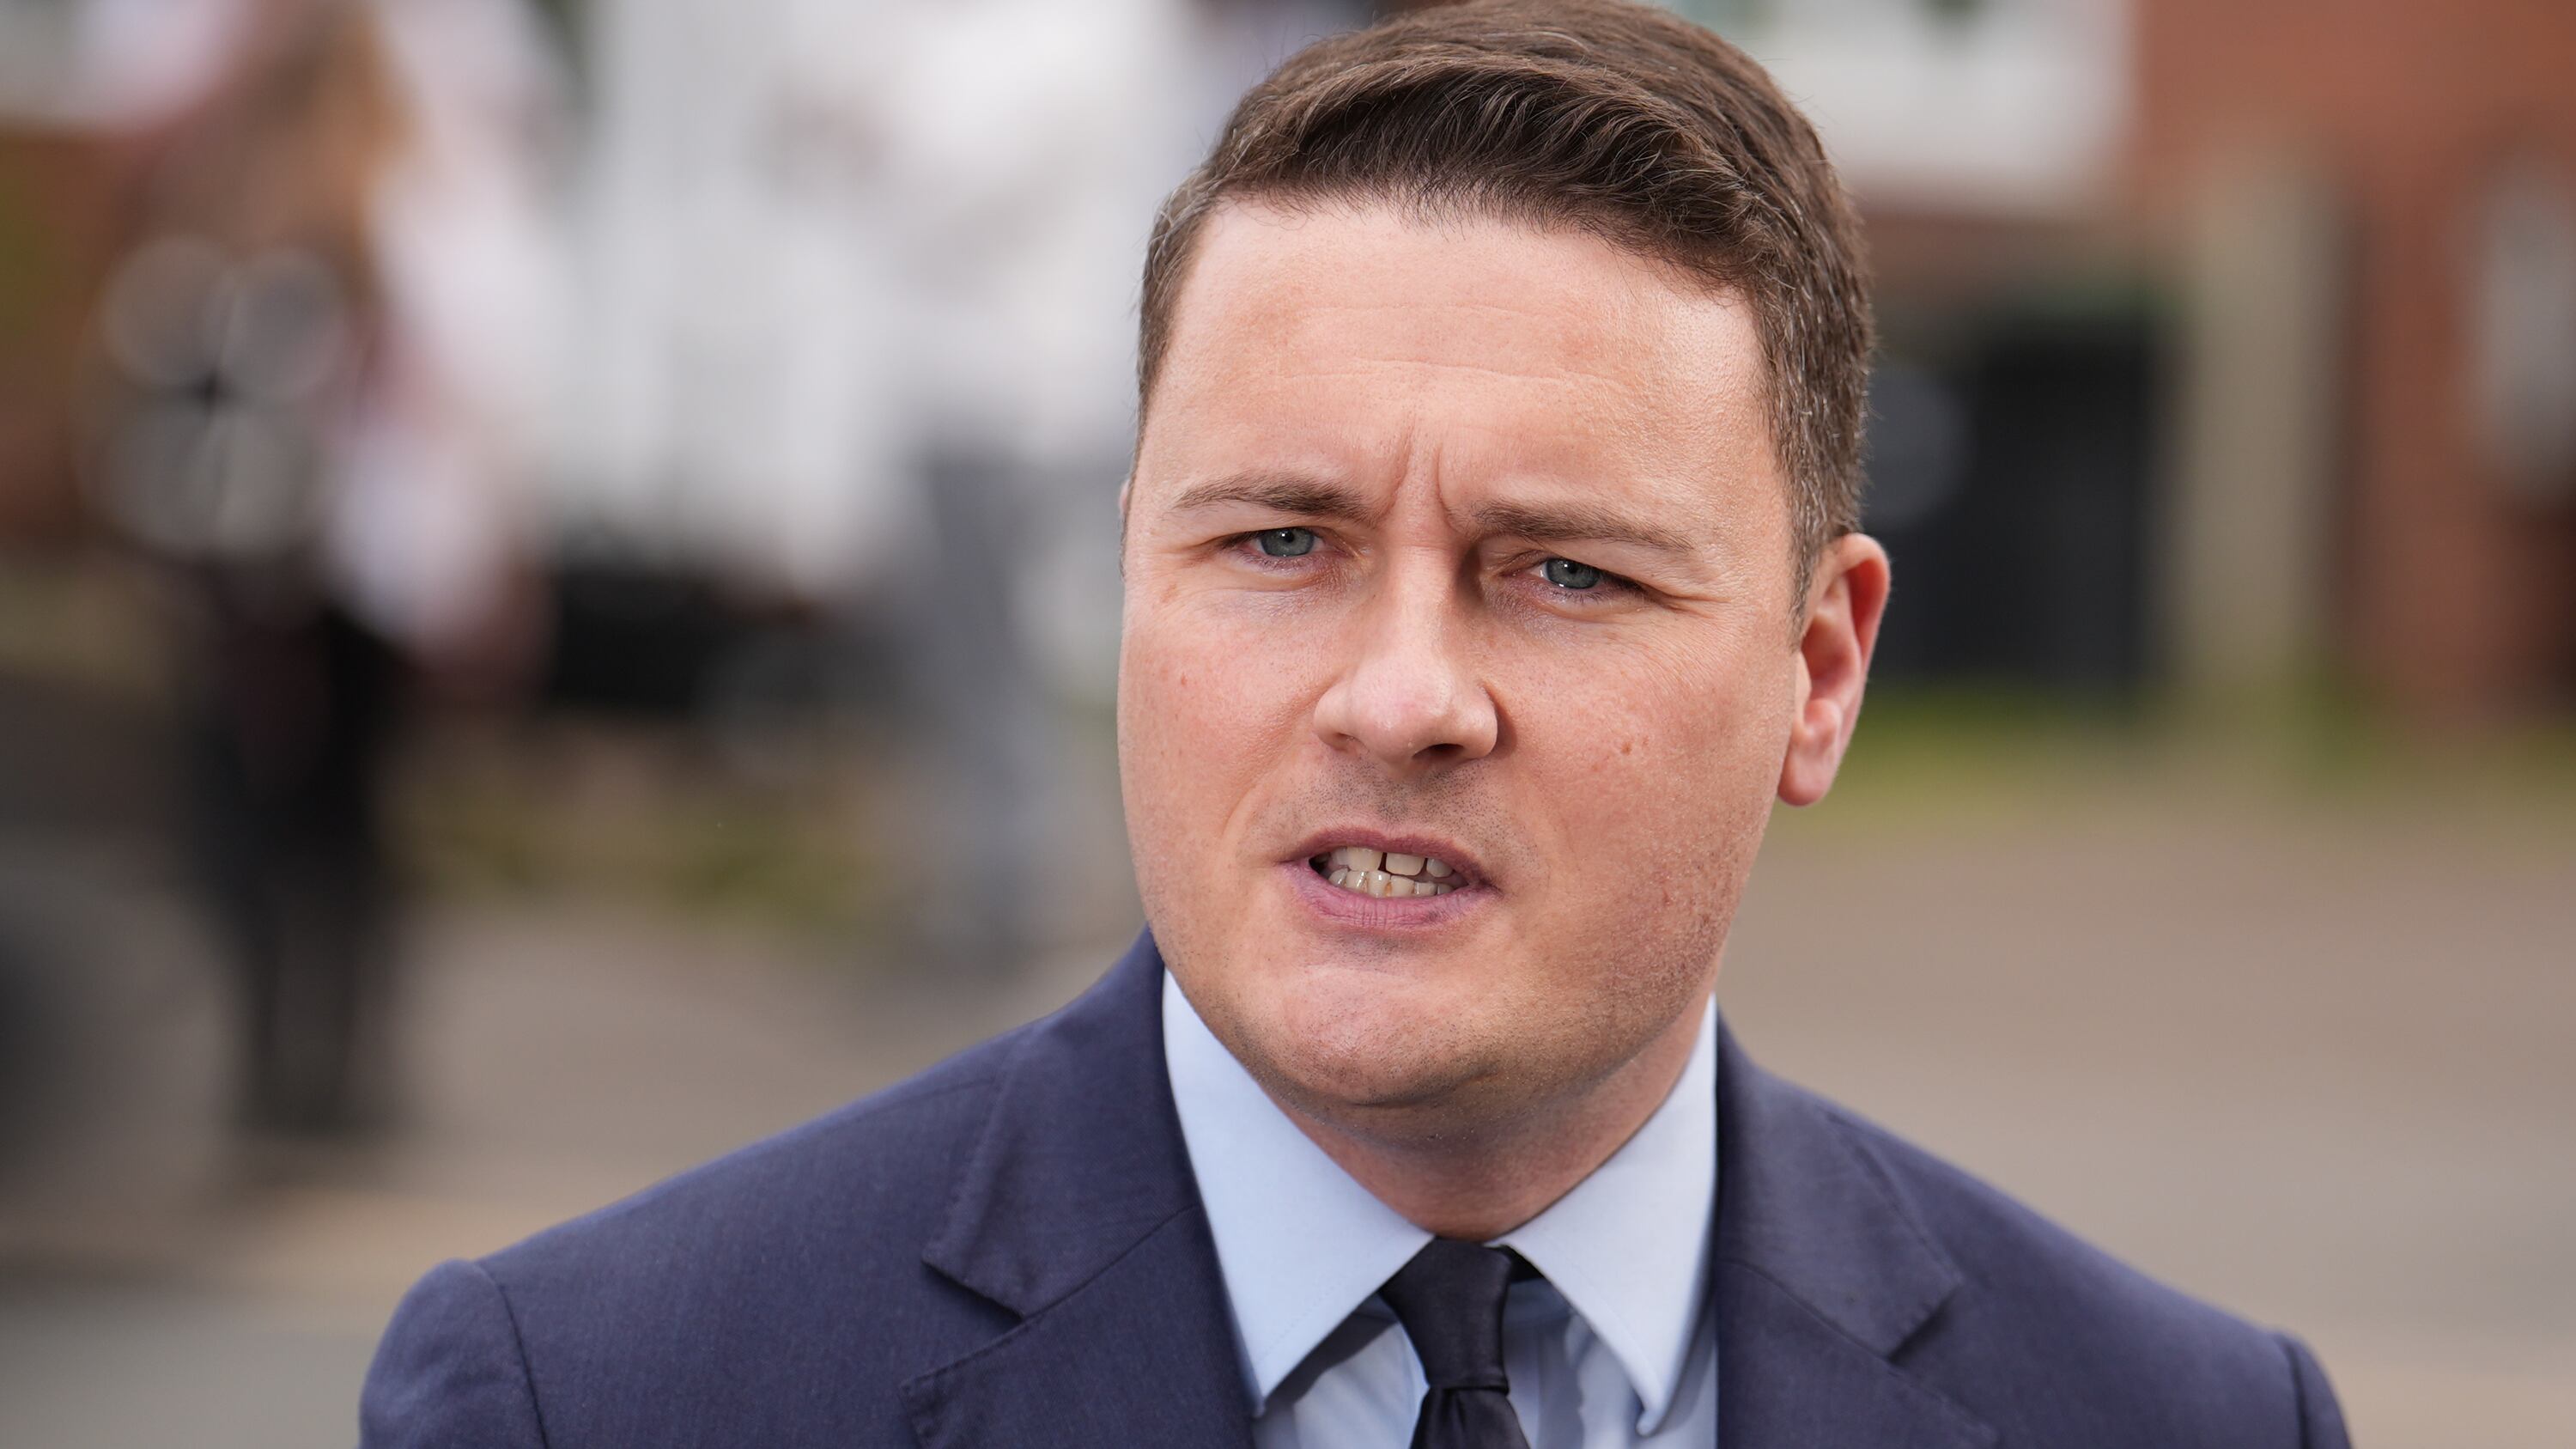 Shadow health secretary Wes Streeting has warned against complacency over polls predicting a Labour victory